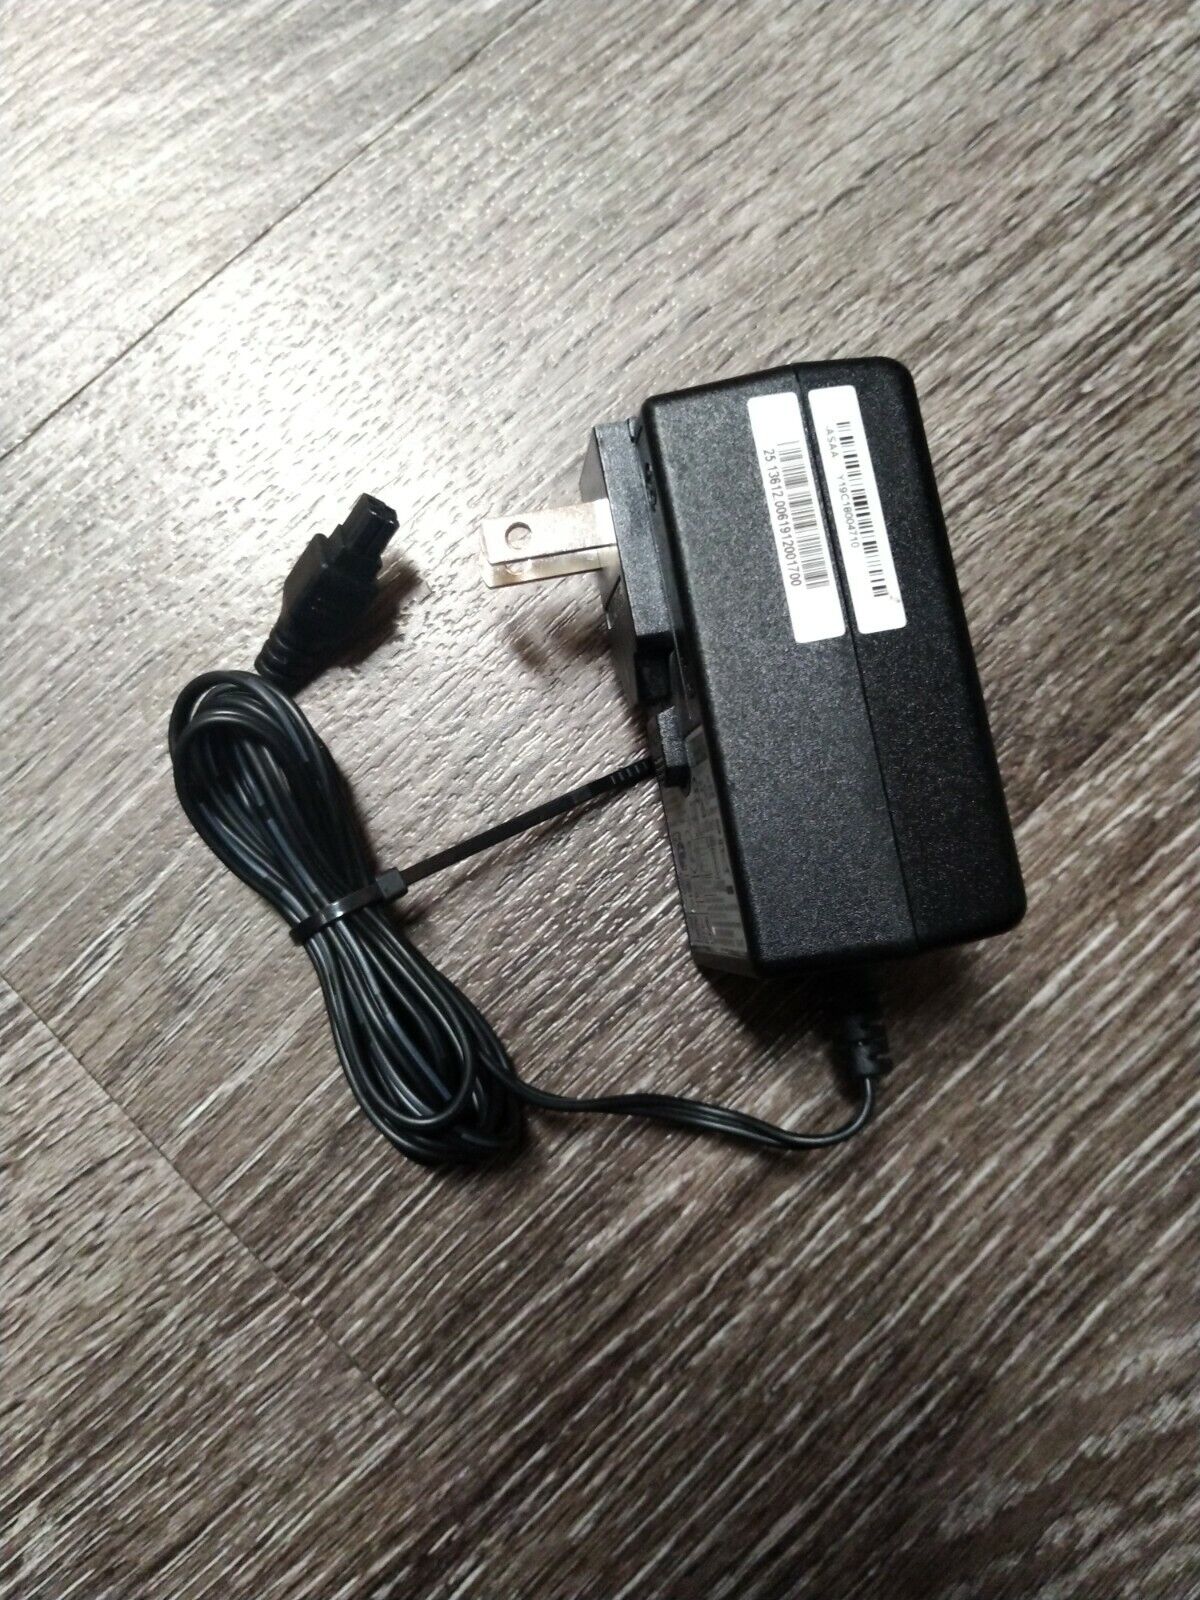 Cradlepoint Power Cable AC Adapter for IBR600 IBR900 IBR1100 IBR1700 E300 R1900 Having a versatile power supply you can